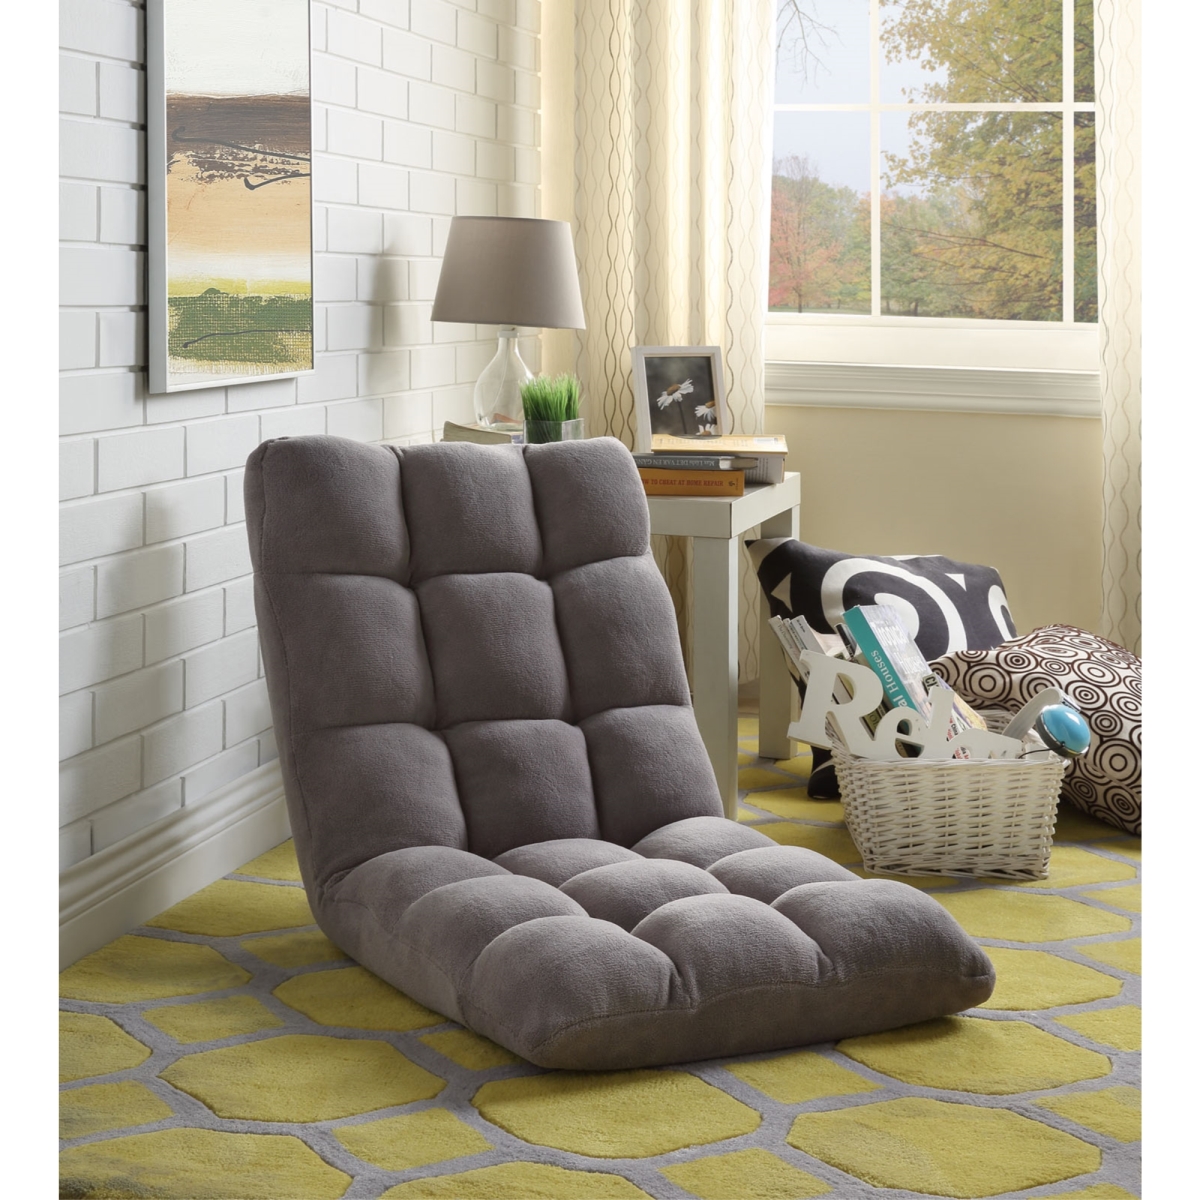 Microplush Modern Armless Quilted Recliner Chair With Foam Filling And Steel Tube Frame - Grey